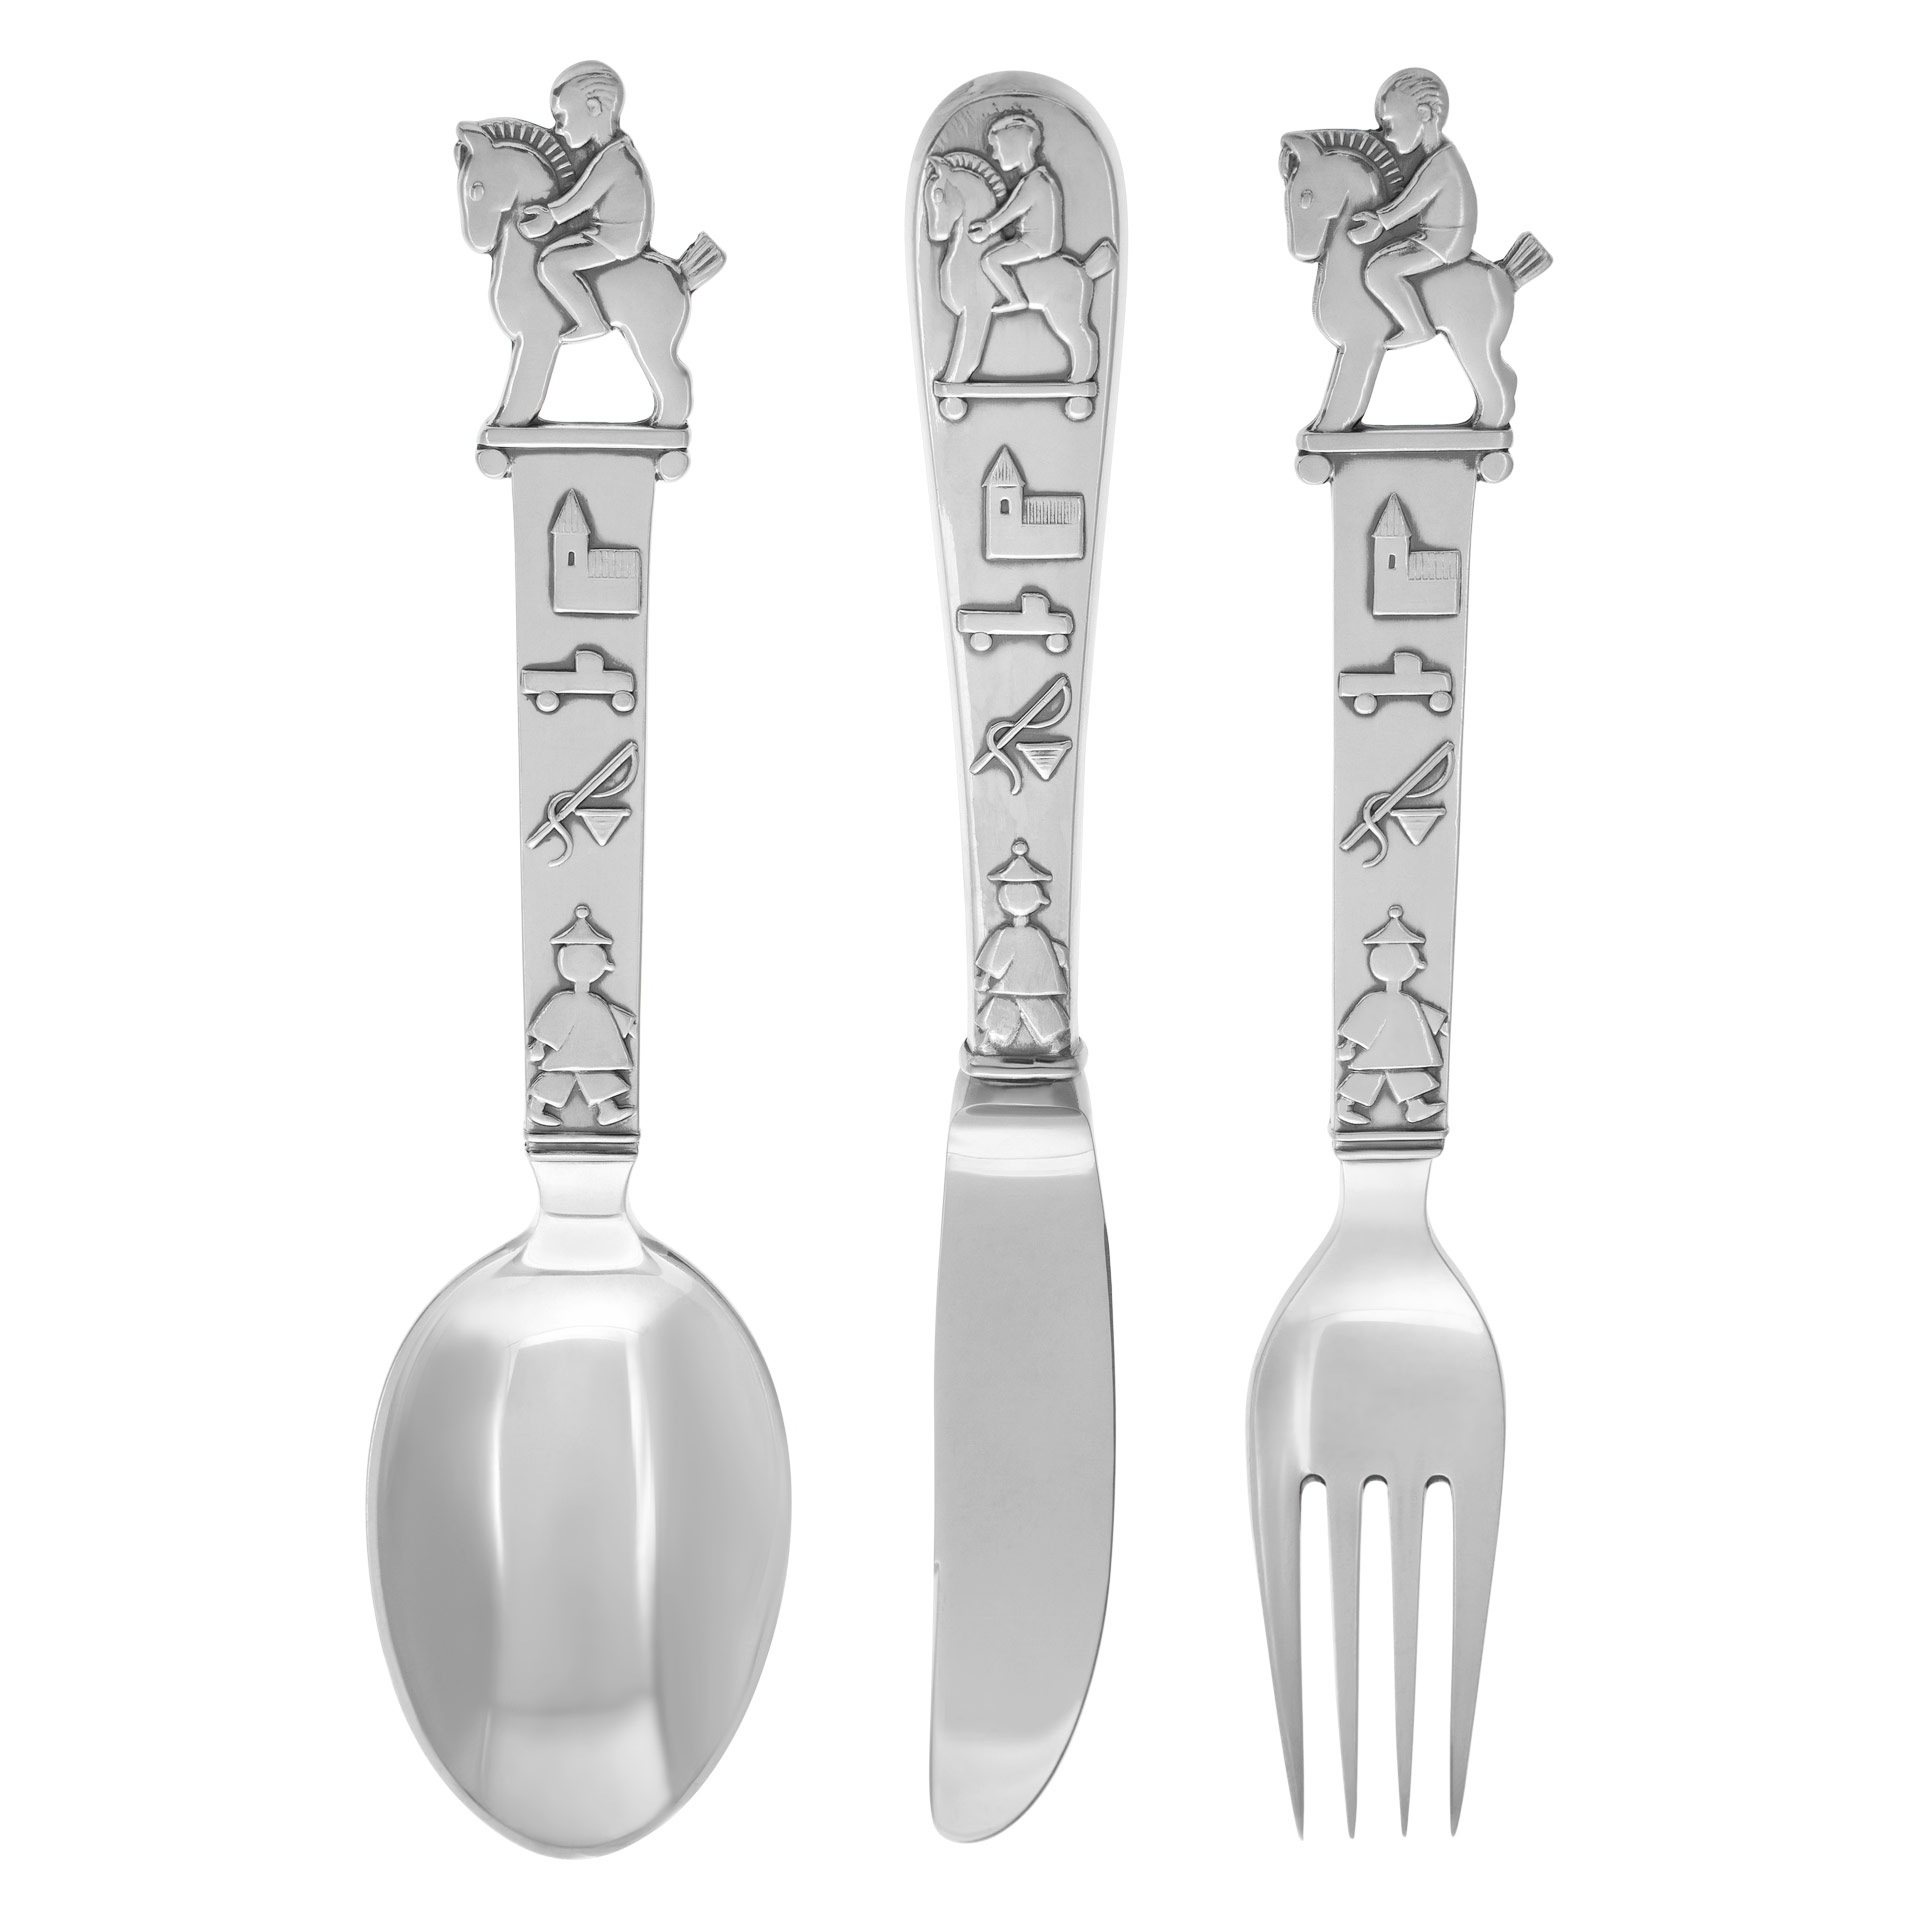 Silver spoon baby's best gift. Figural Danish sterling silver 3 pieces youth set by COHR. Knife.spoon & fork.